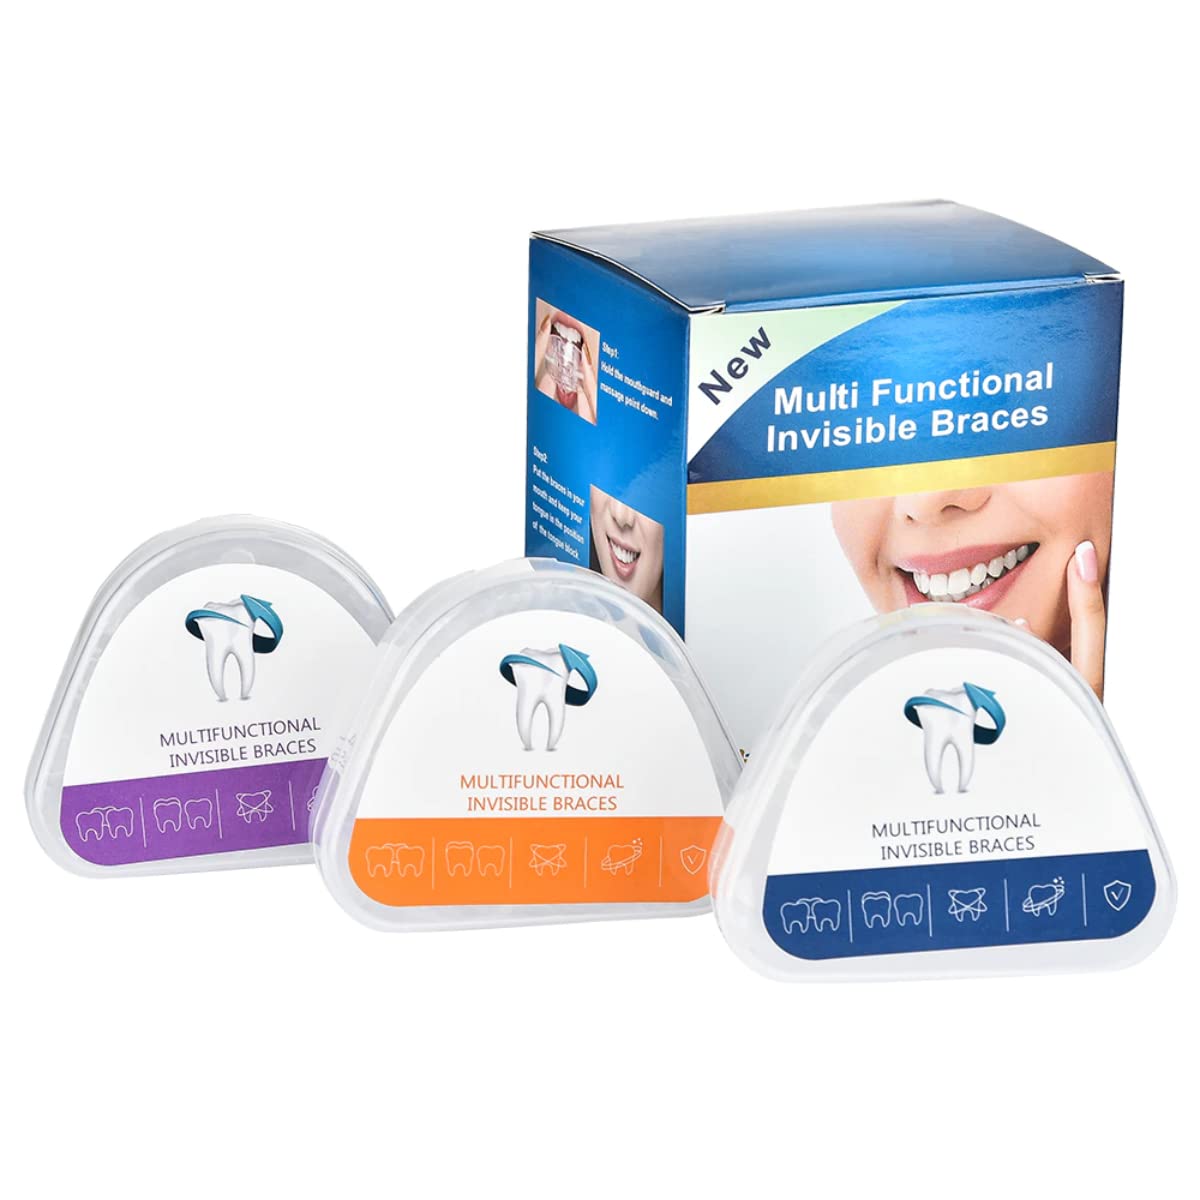 Protector Tooth Retainer for Smile Correction 3 Stages Soft and Hard Transparent Professional Dental Orthodontic Device Mouth Guard (3 stages, suitable for different teeth conditions)